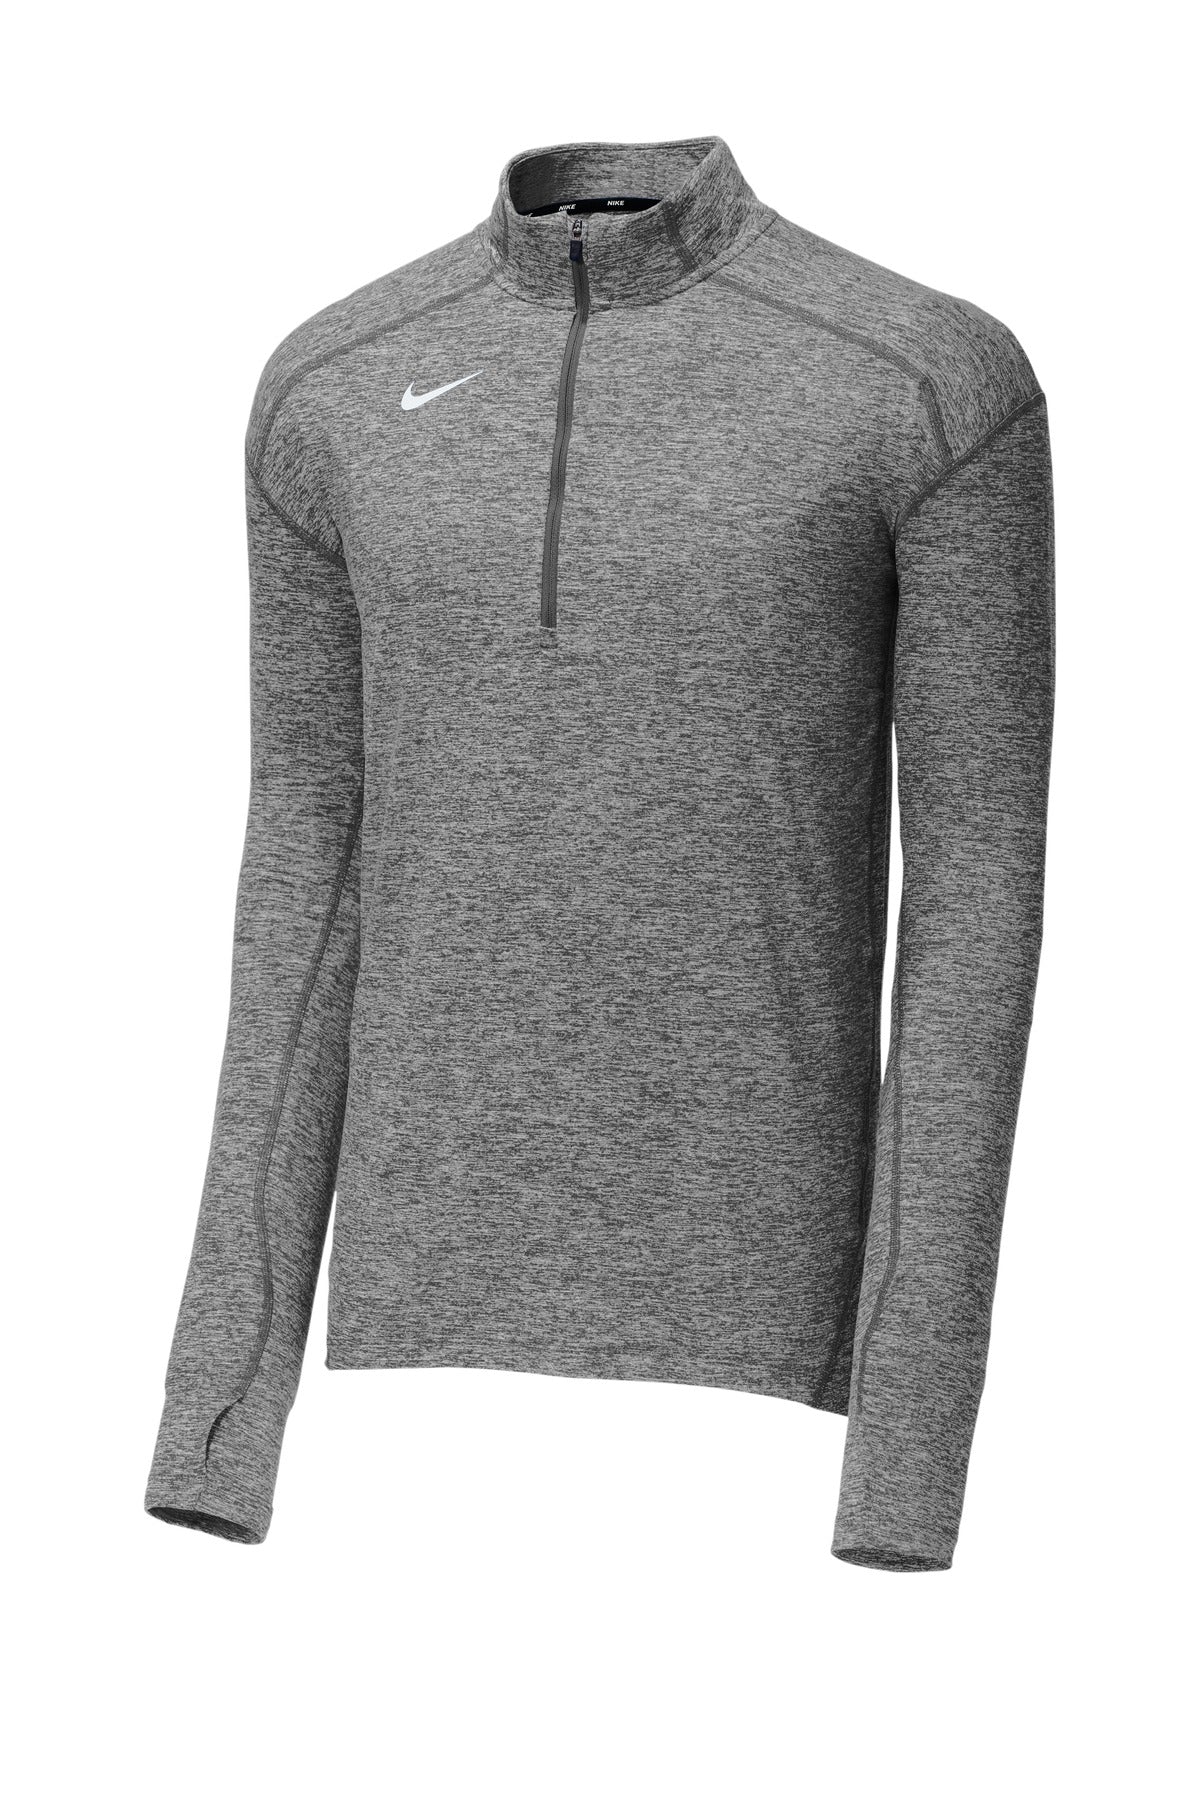 Nike Dry Element 1/2-Zip Cover-Up 896691 Stitch